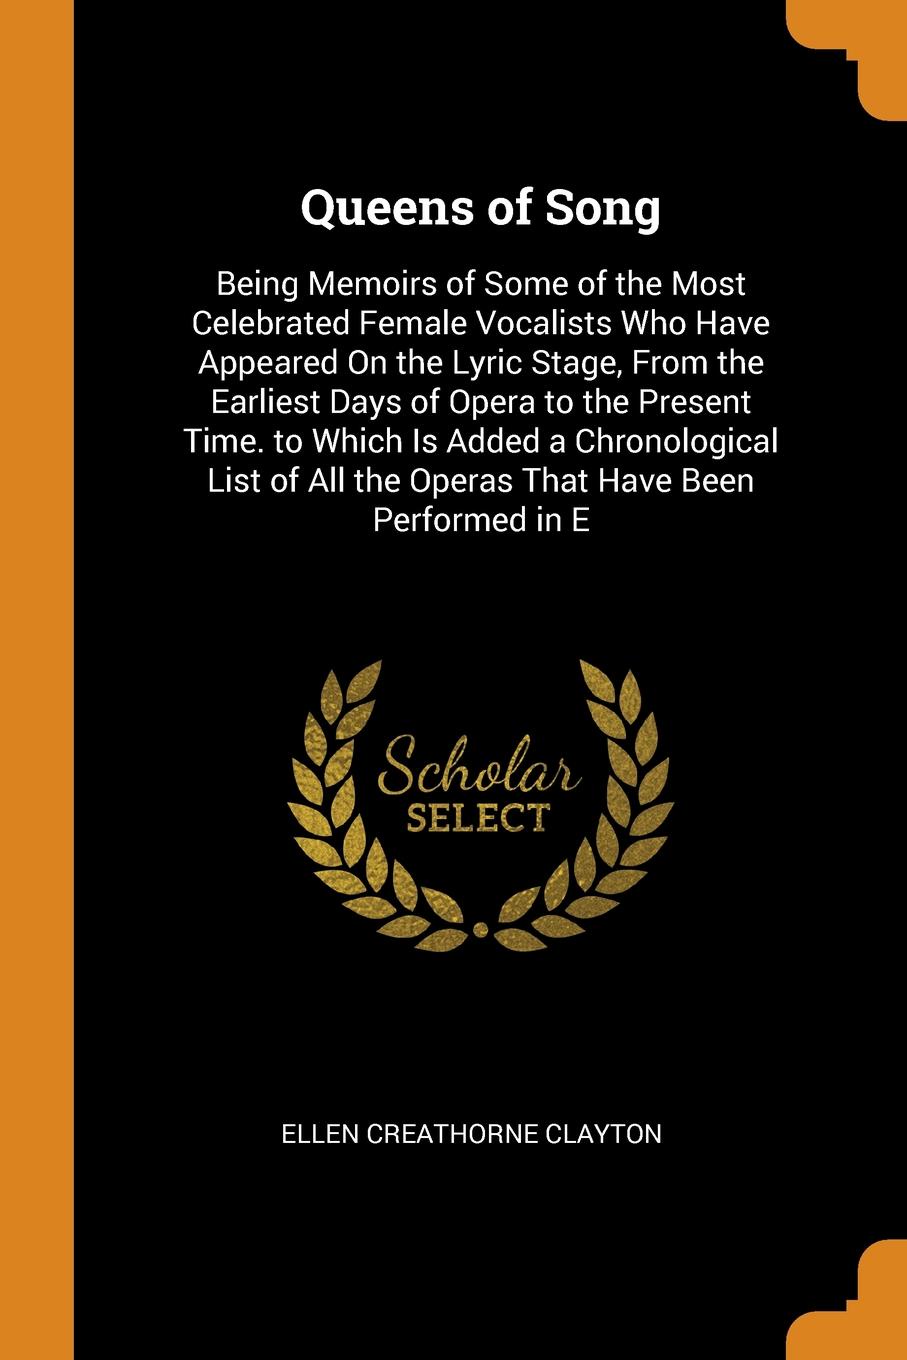 Queens of Song. Being Memoirs of Some of the Most Celebrated Female Vocalists Who Have Appeared On the Lyric Stage, From the Earliest Days of Opera to the Present Time. to Which Is Added a Chronological List of All the Operas That Have Been Perfor...